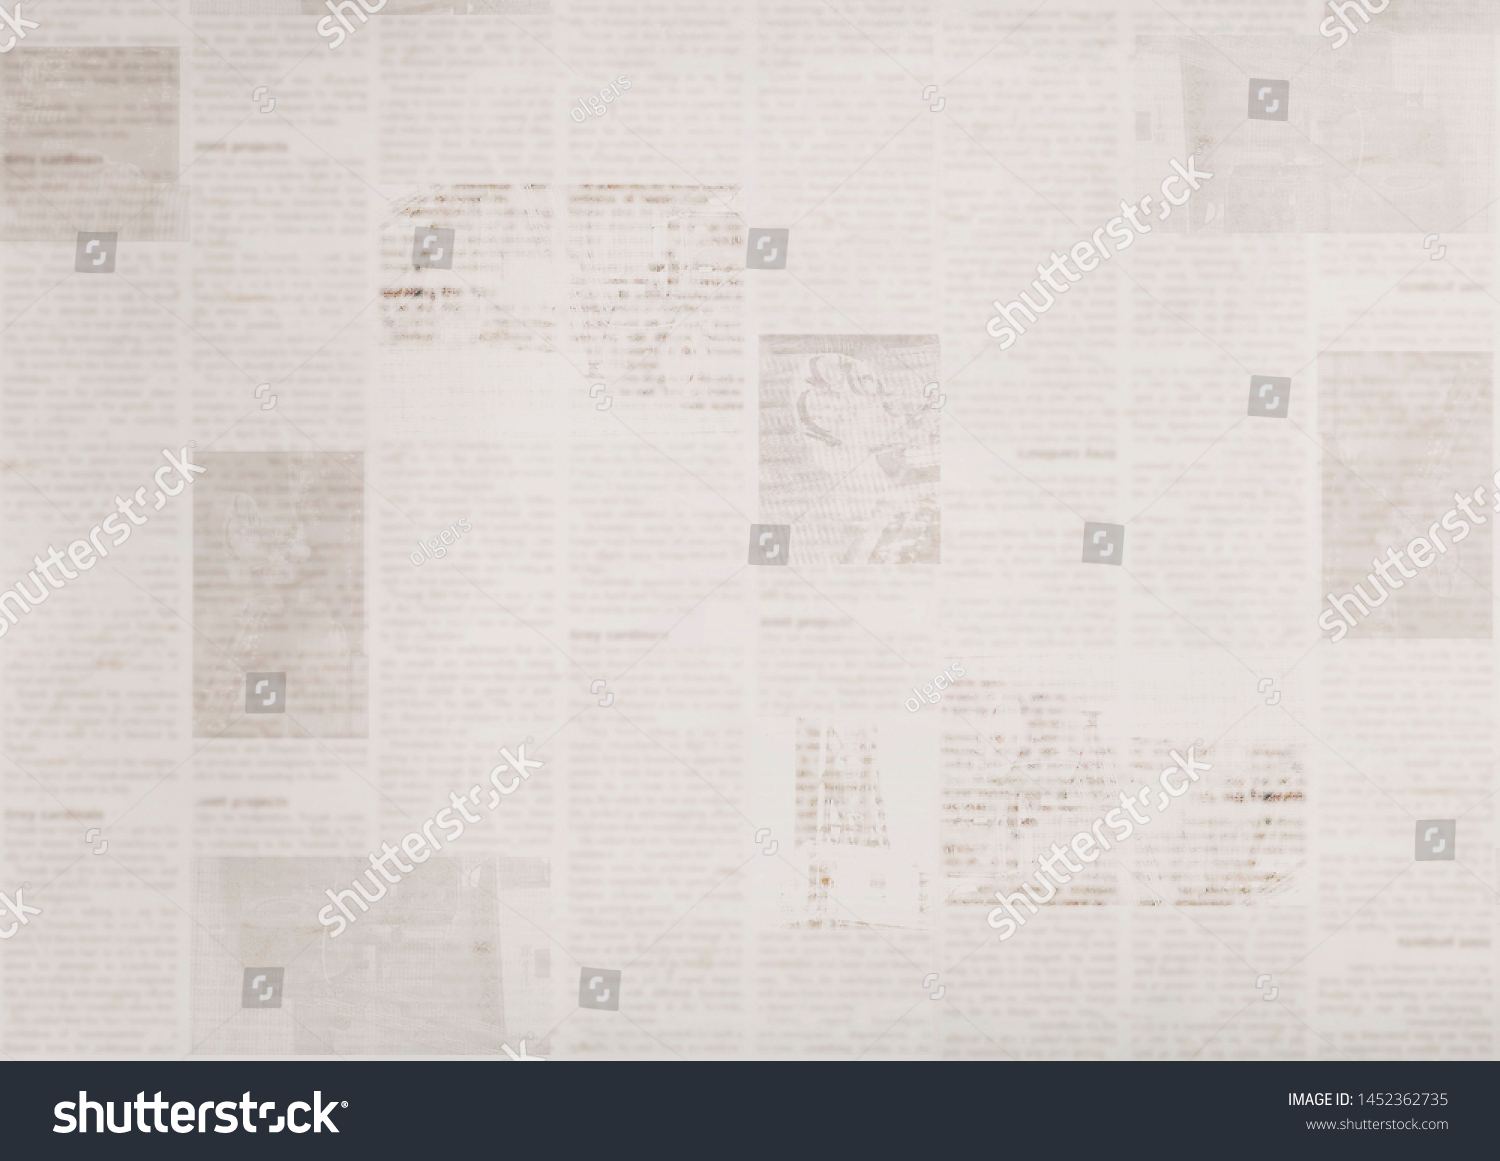 Vintage grunge newspaper paper texture background. Blurred old news background. A blur unreadable aged newspapers page with place for text. Gray brown beige collage news pages background. #1452362735